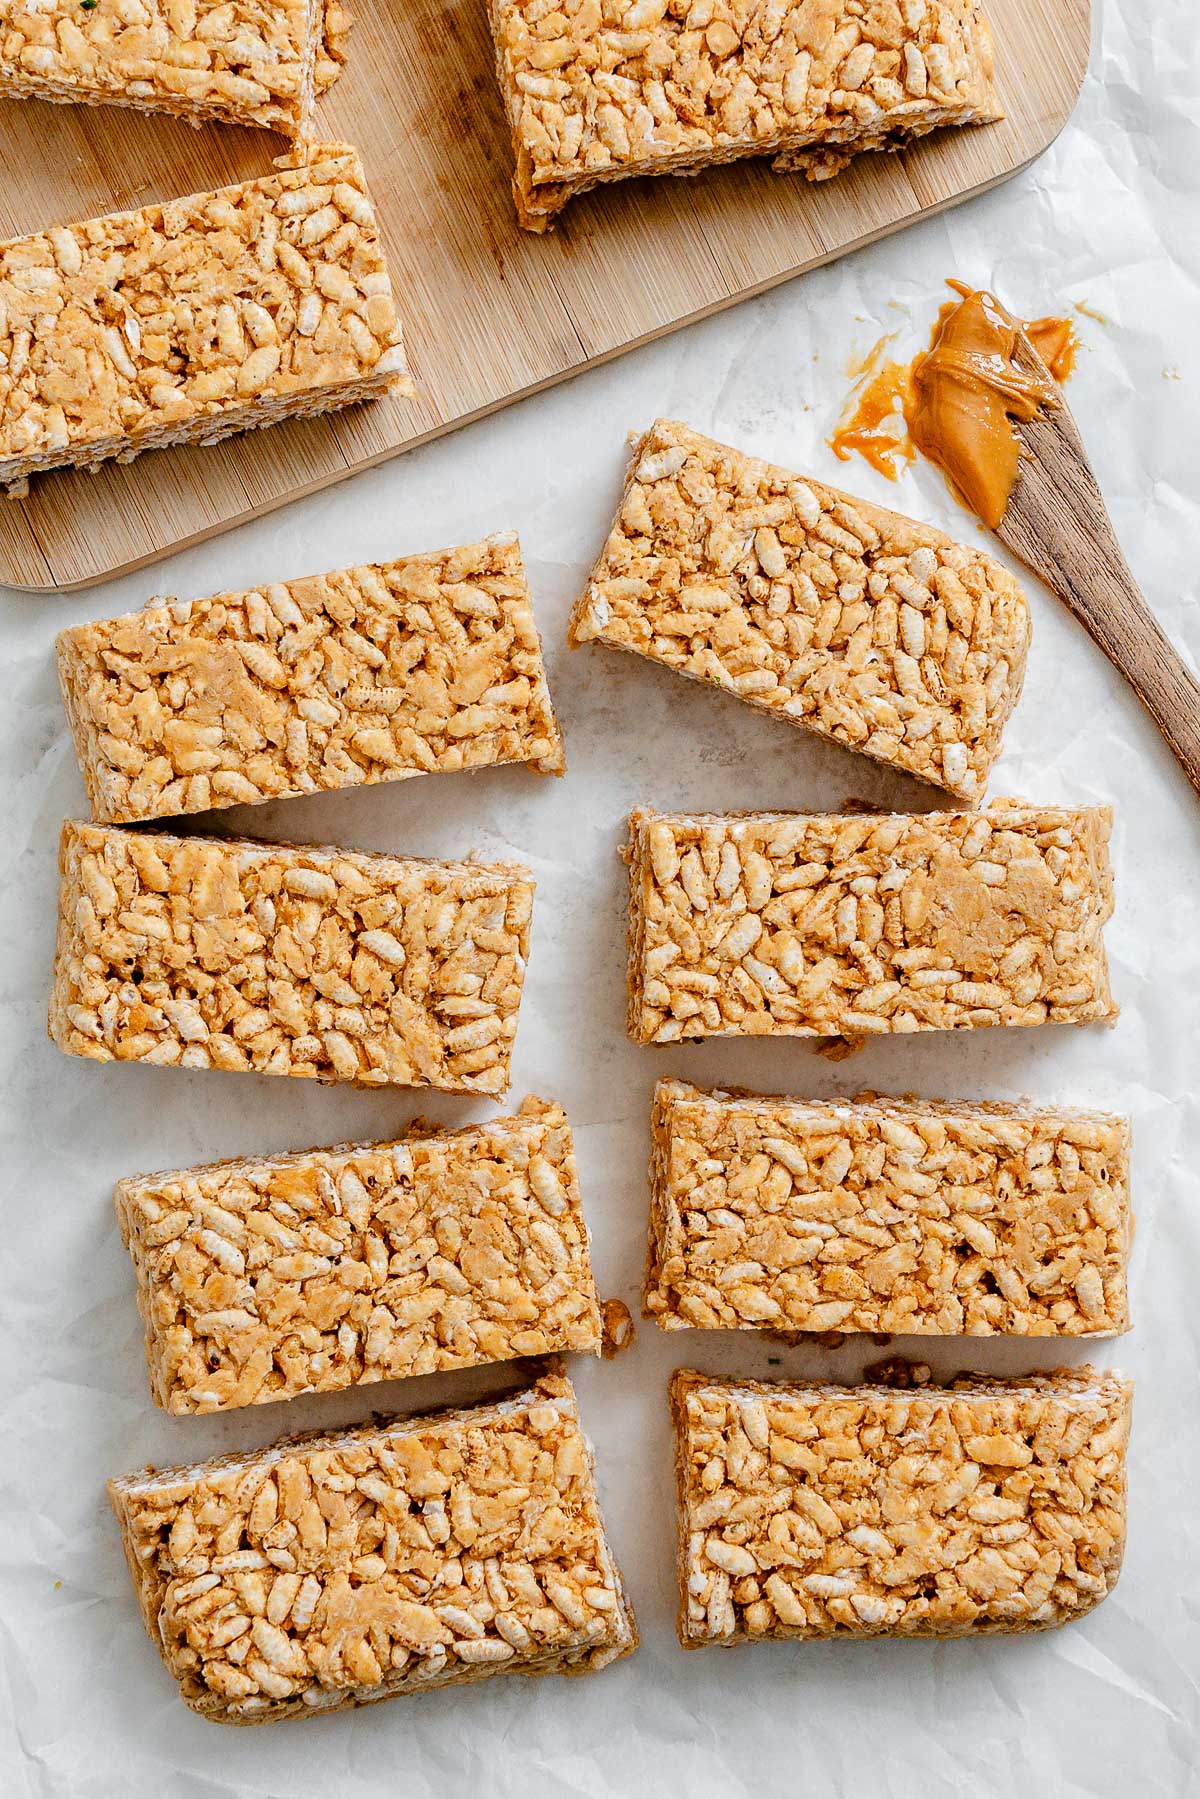 several completed Peanut Butter Rice Krispie Treats against a white surface